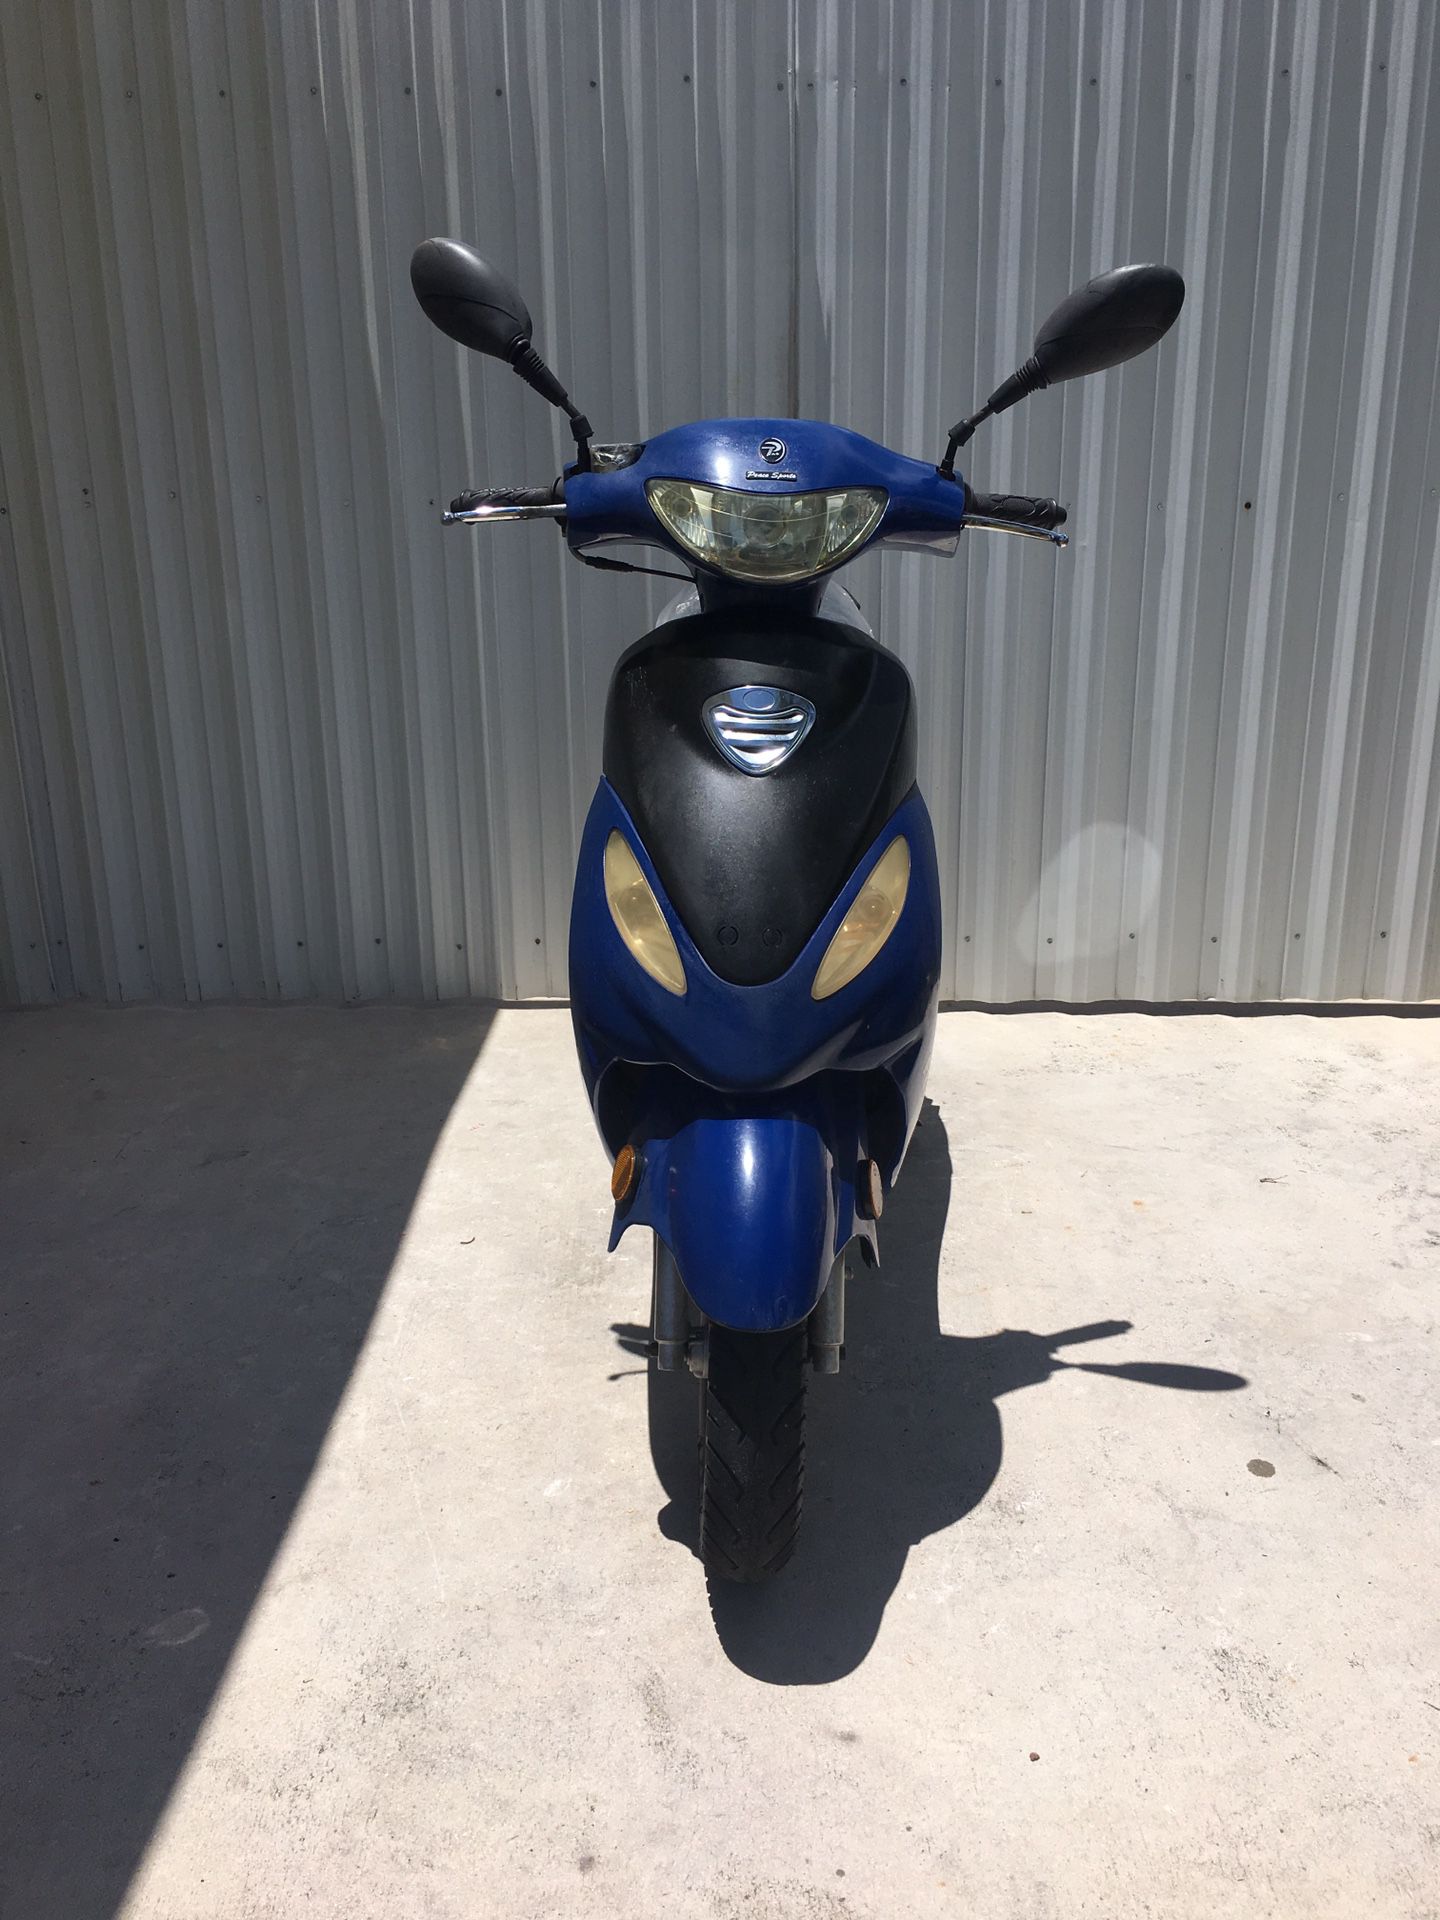 Scooter 50cc 🛴 🛴 💰 - 2017 - Big Offer - Only Cash - Don’t Need Insurance’s